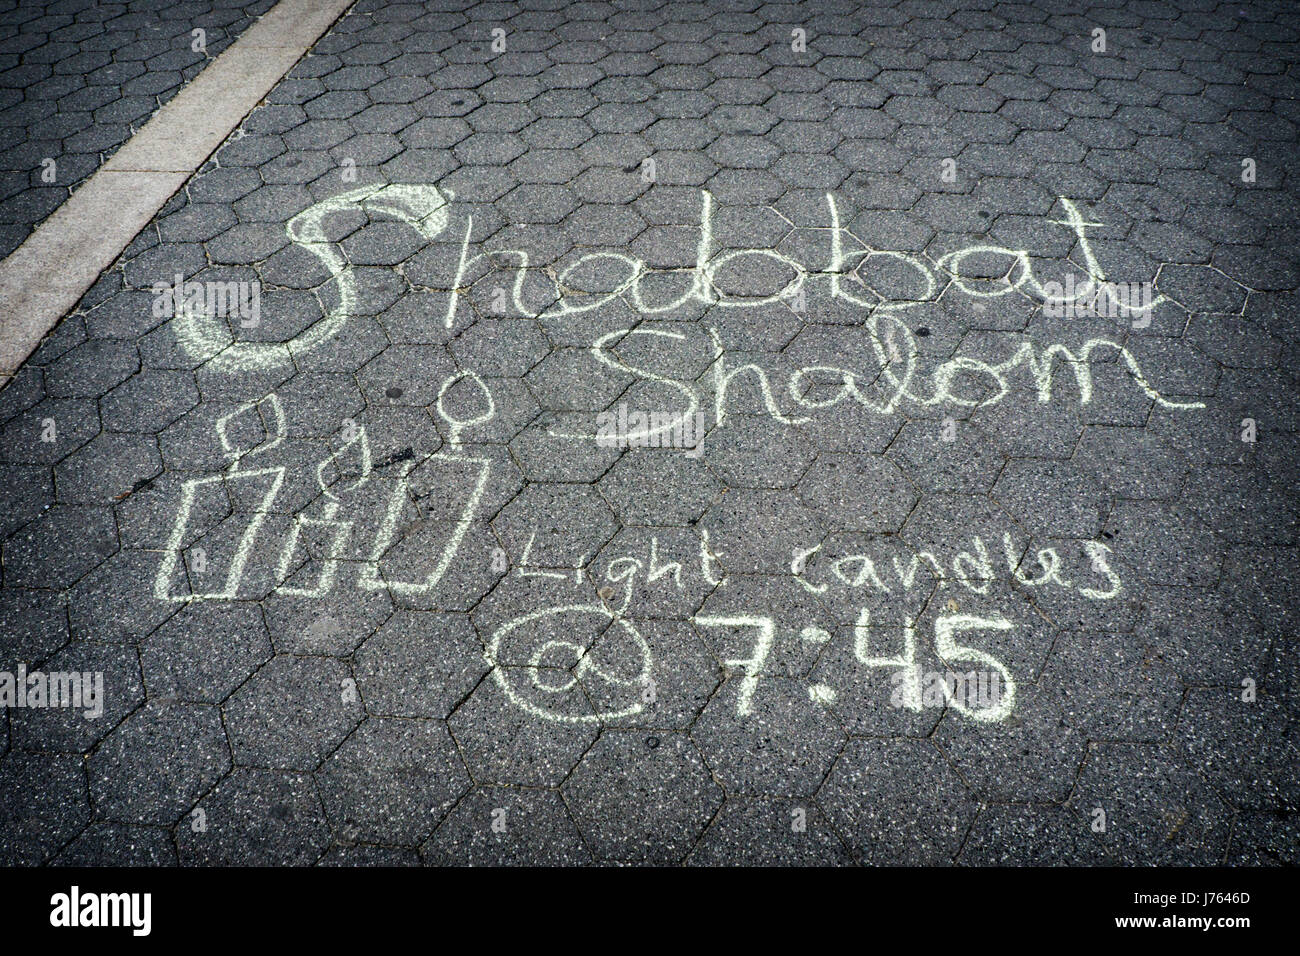 A chalk message in Union Square Park in Manhattan telling Jewish women passersby when to light Sabbath candles. Stock Photo